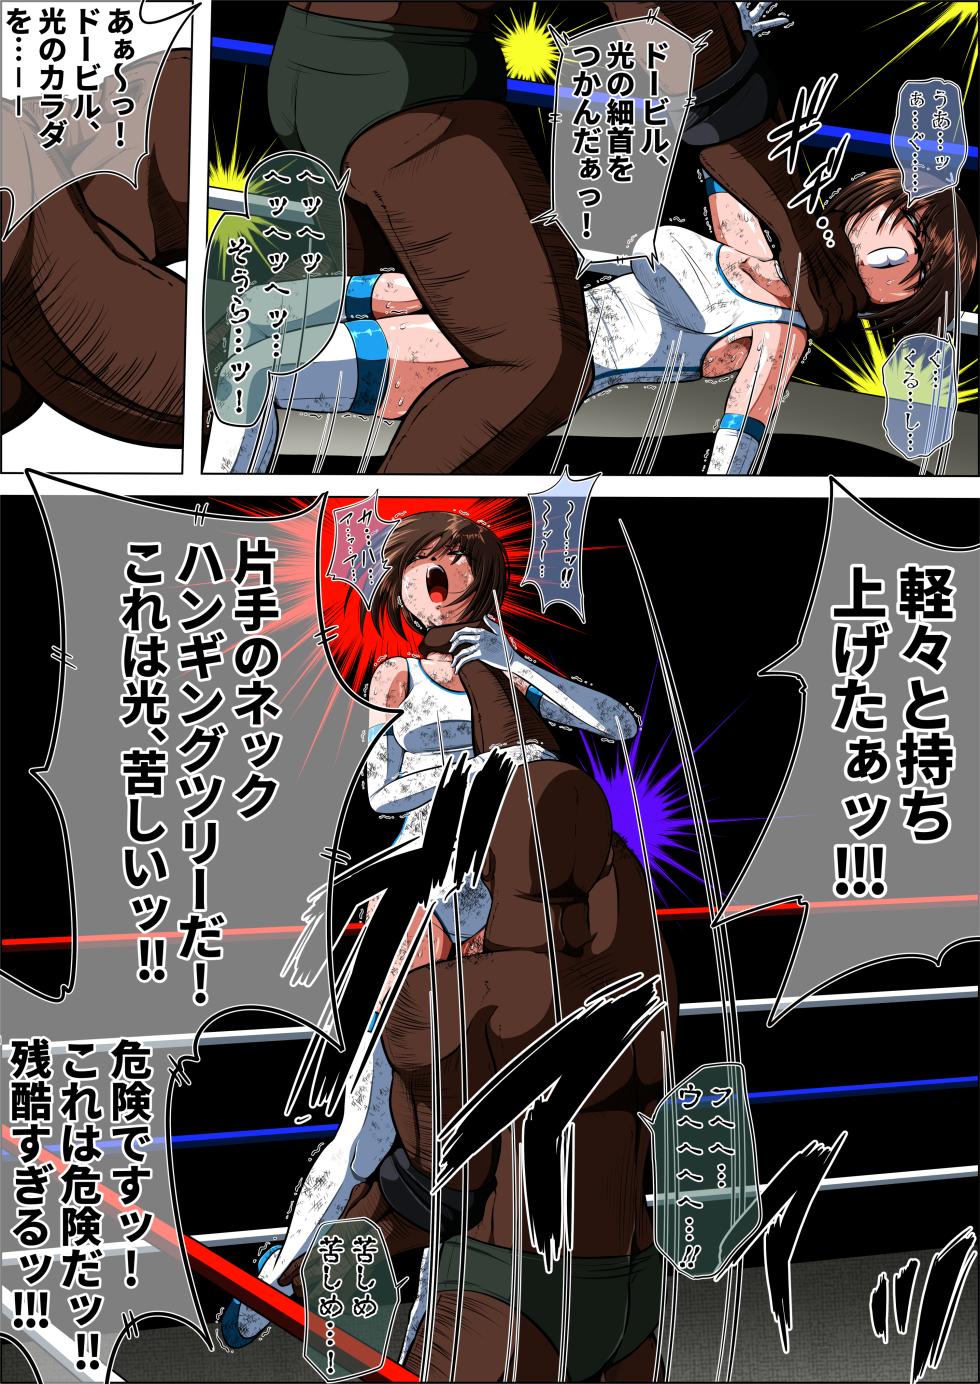 Cage of despair  (OLI)  First part  Light crisis Gaiden - Page 24